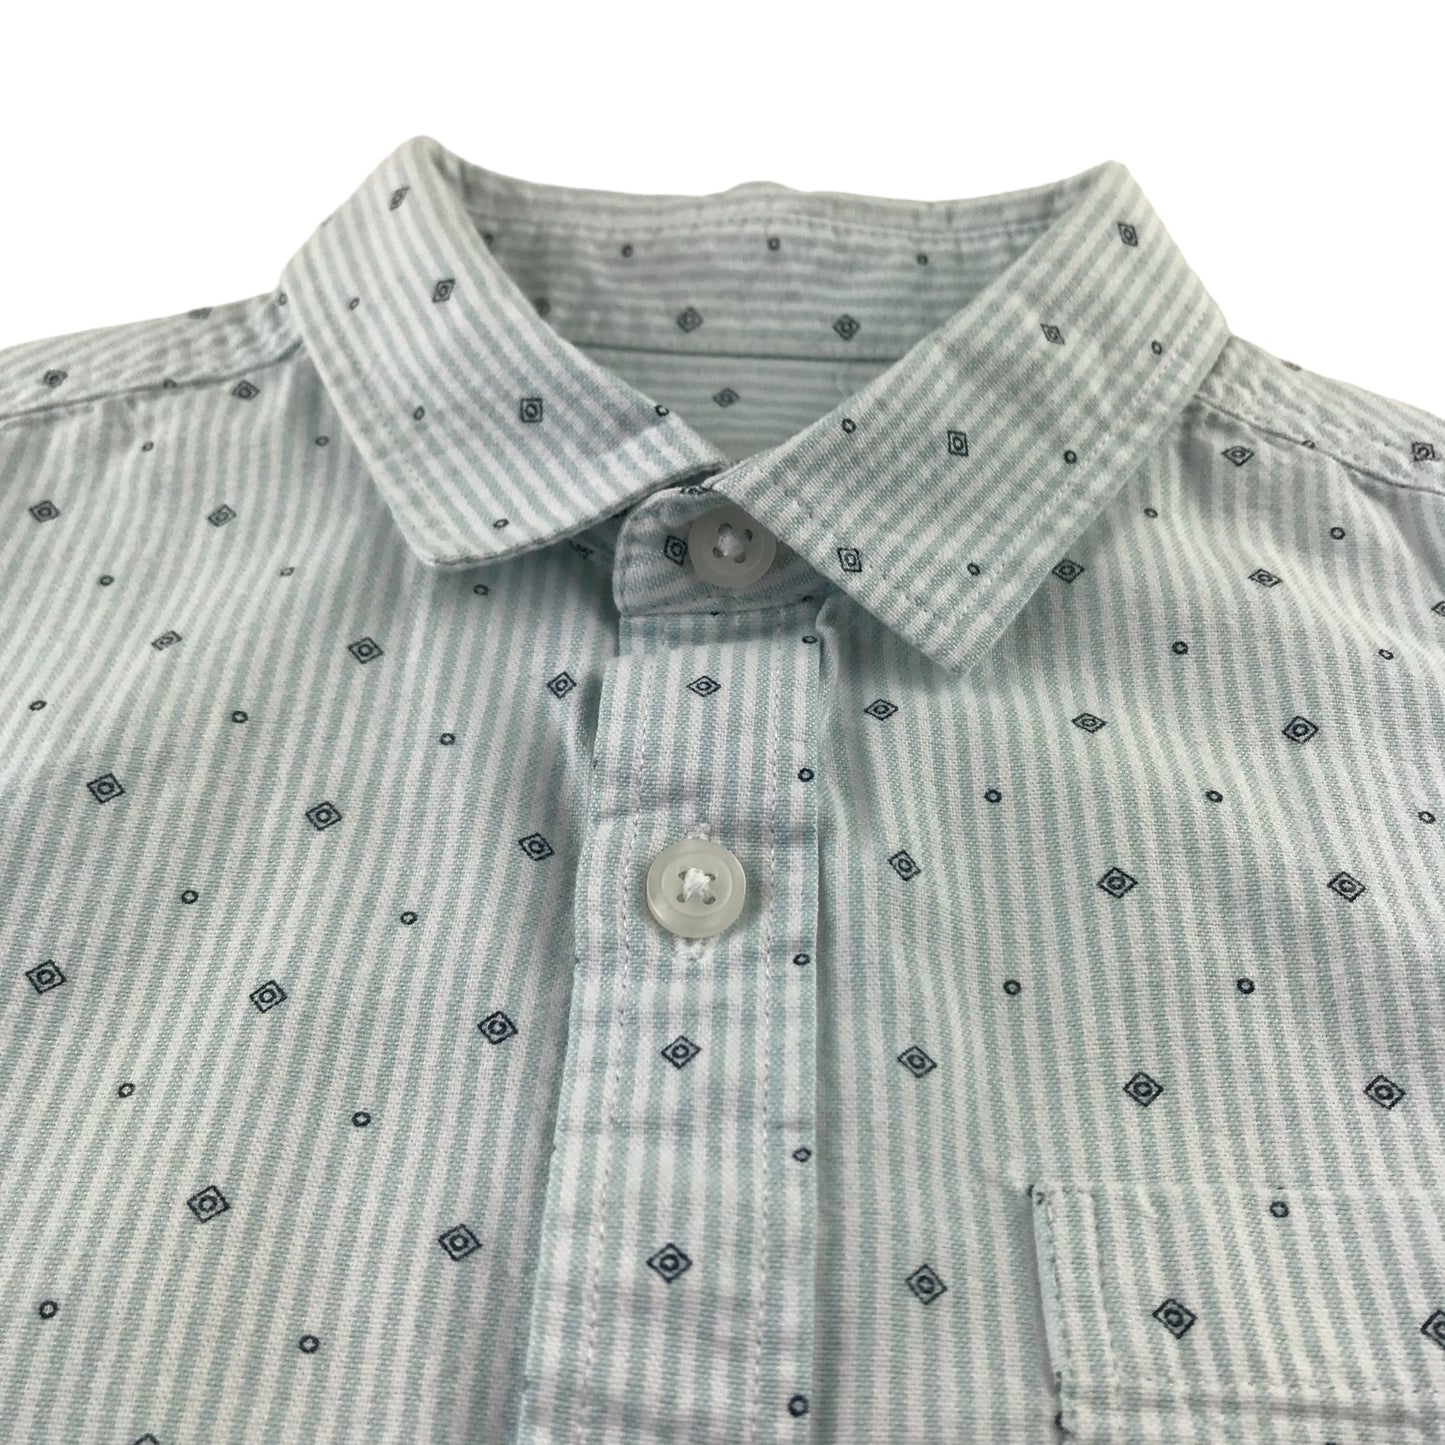 River Island Shirt Age 7 Light Blue and White Stripy with Diamond Pattern Short Sleeve Button Up